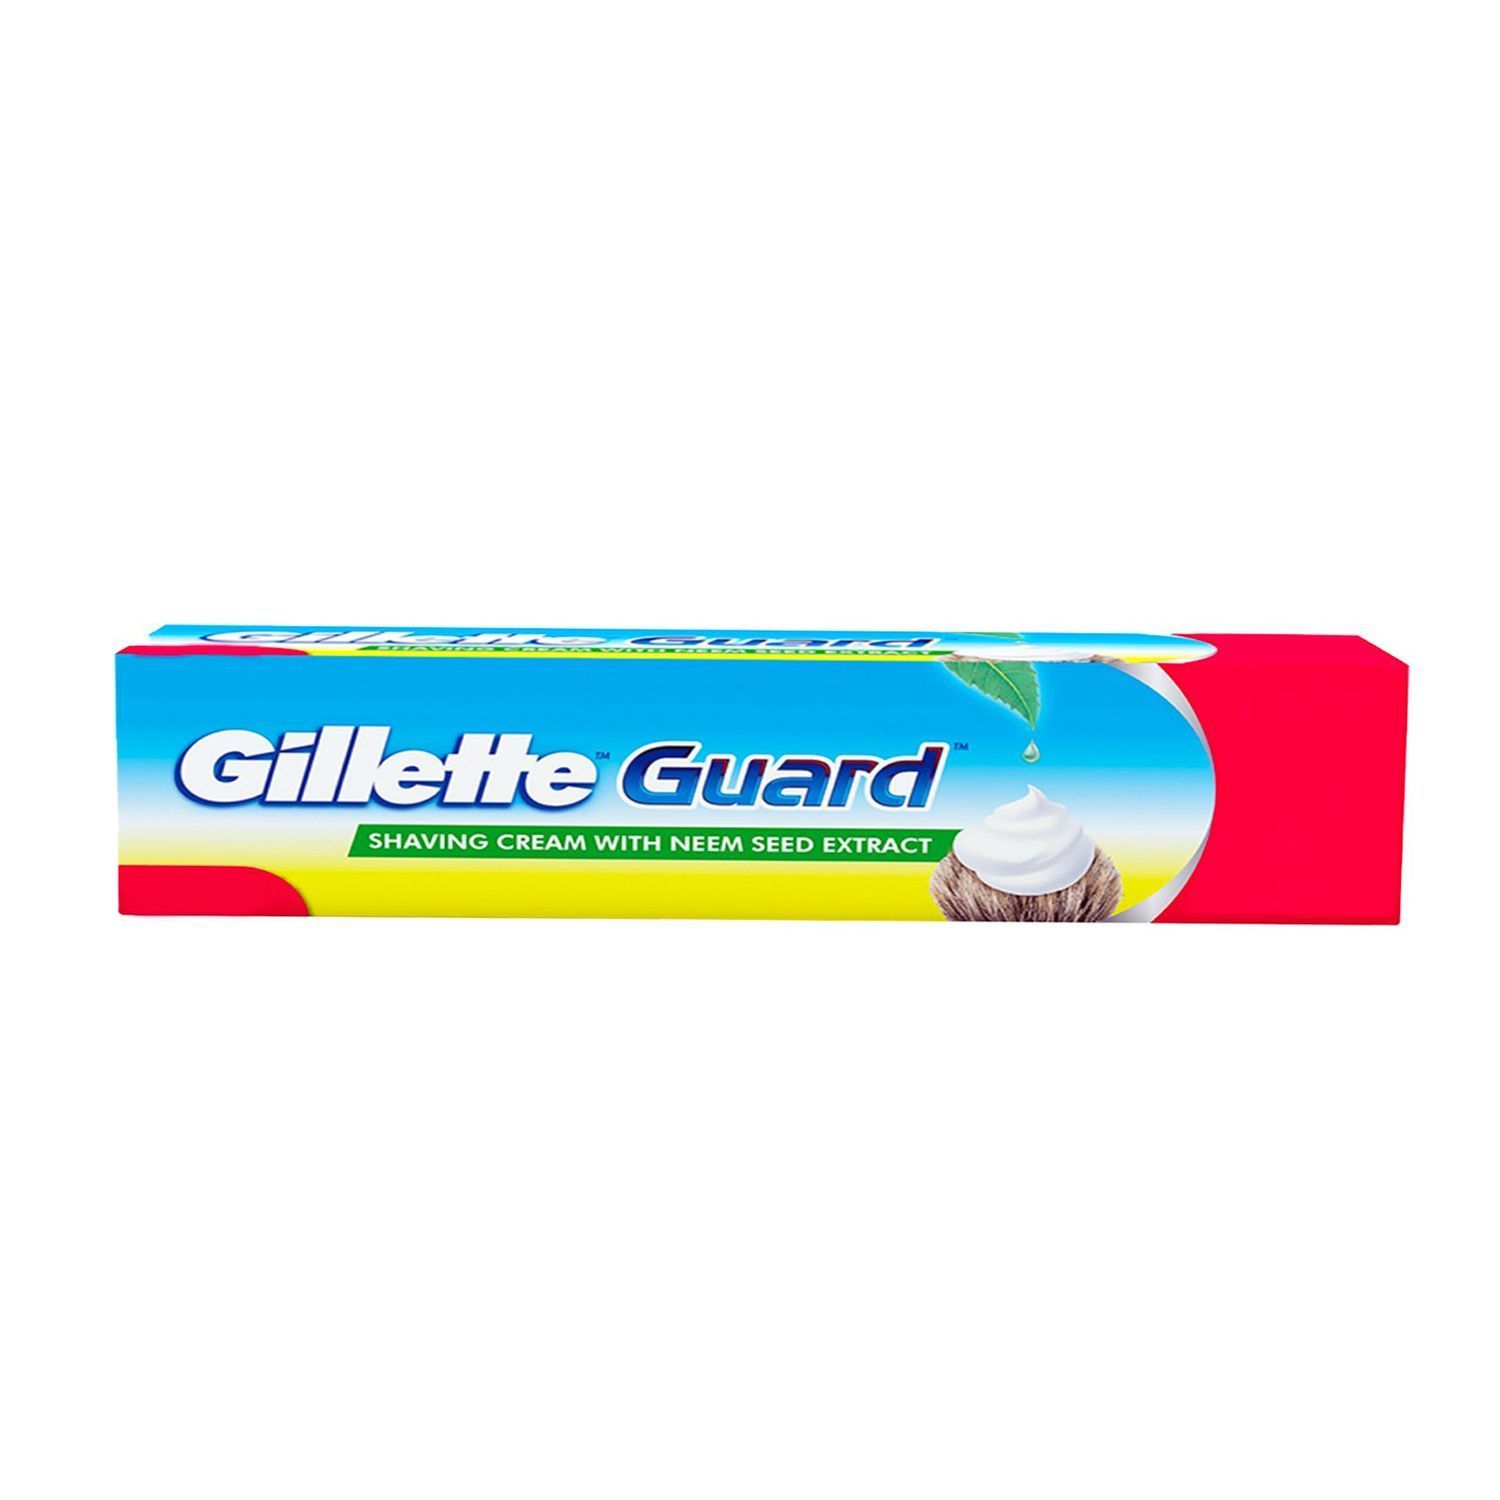 Gillette Guard Complete Shaving New Year Gift Pack